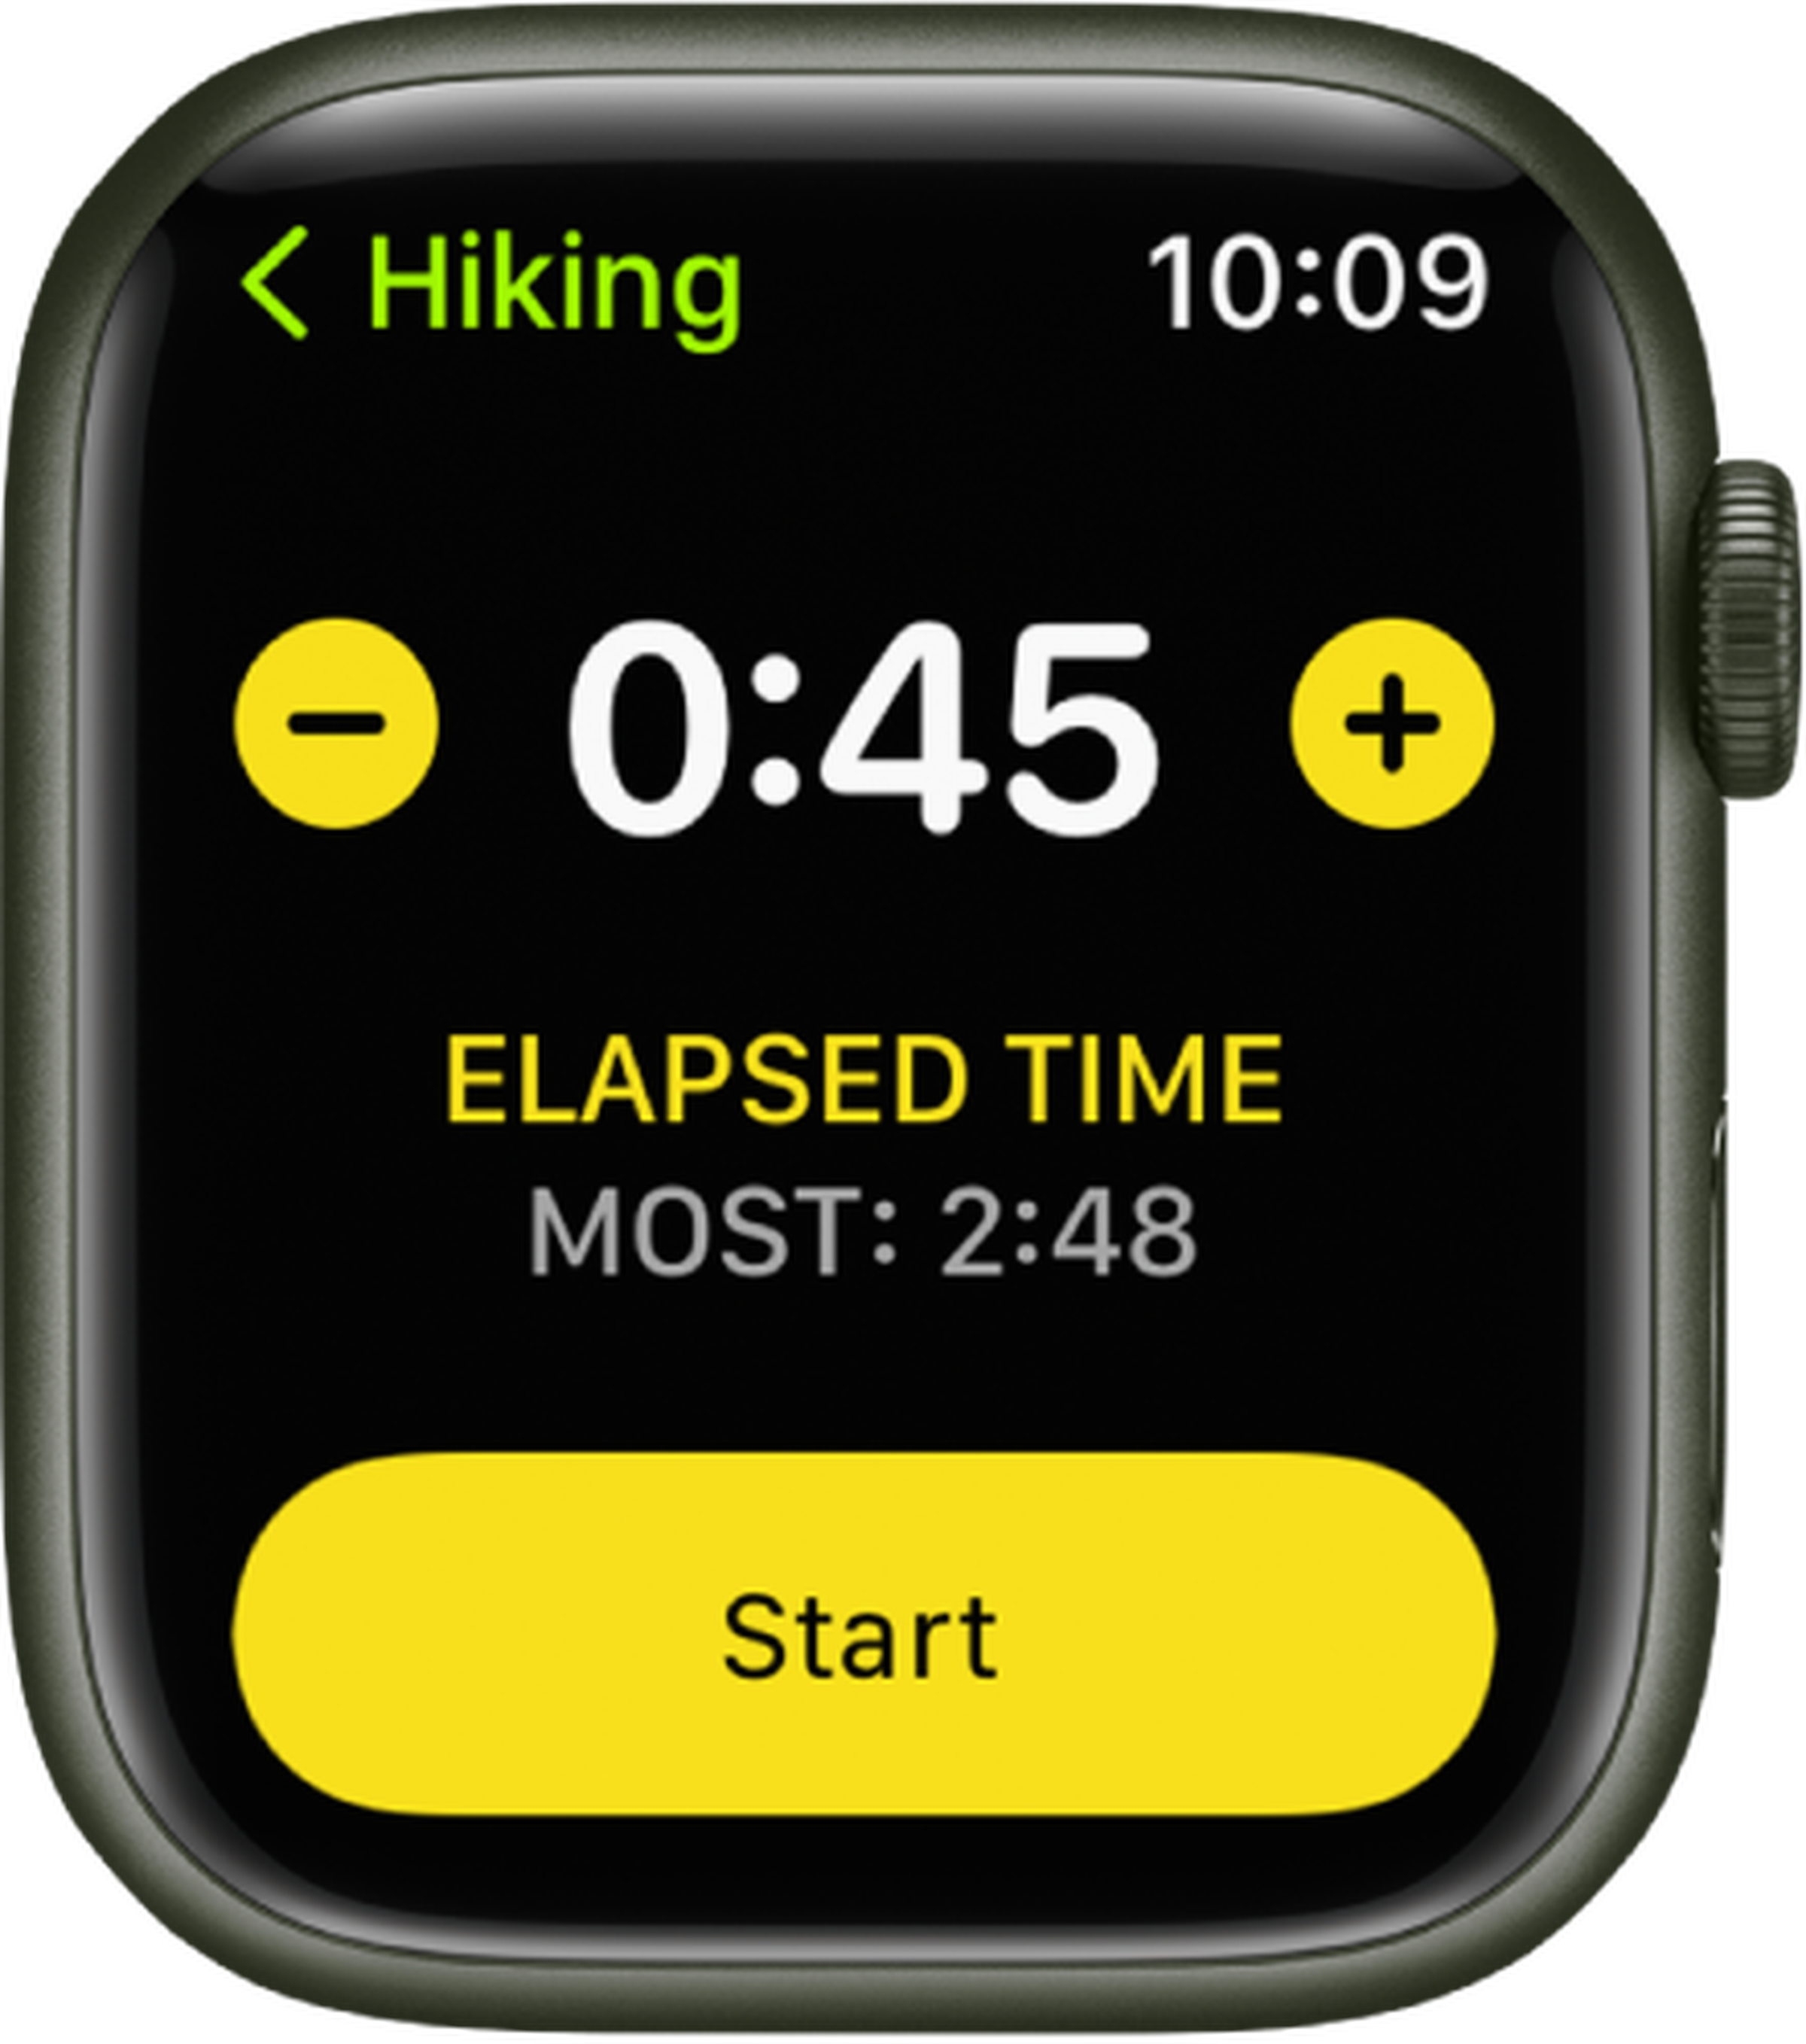 This is what the Time goal looks like for a hiking activity.